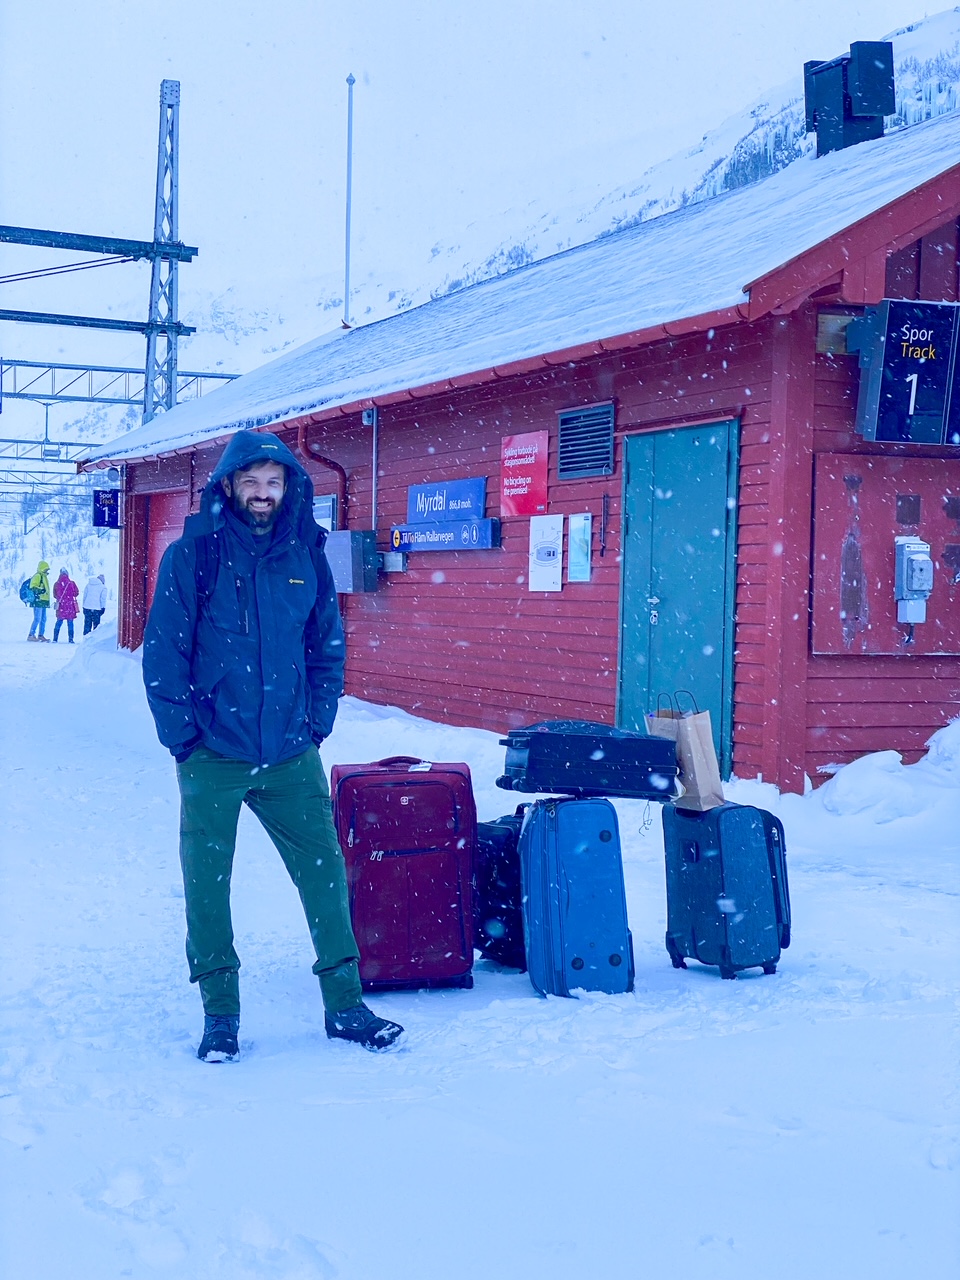 Tim standing with our luggage in the snow in Myrdal, Norway